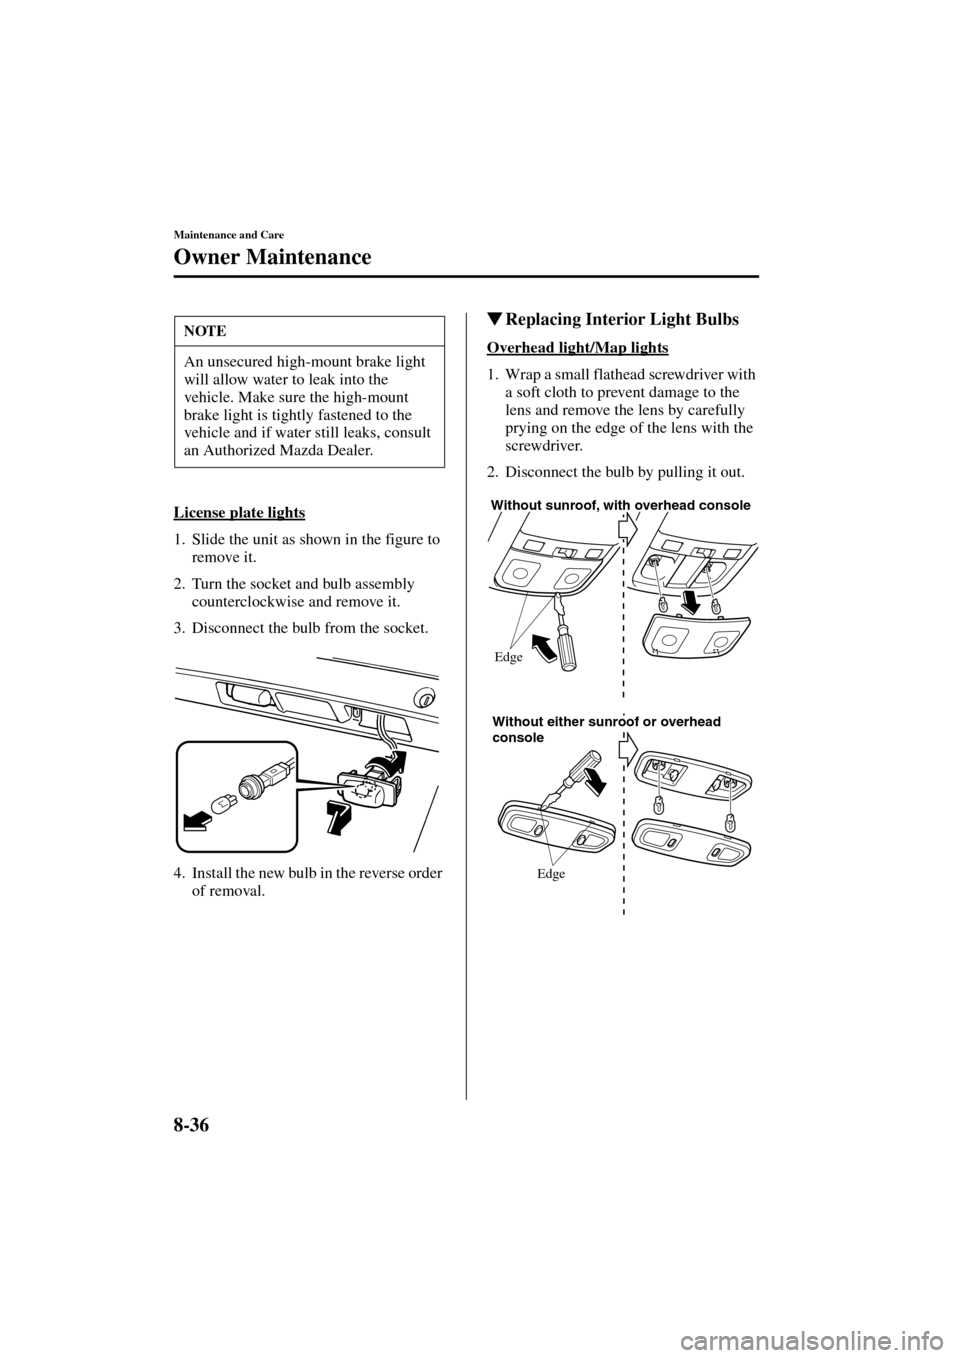 MAZDA MODEL MPV 2004  Owners Manual (in English) 8-36
Maintenance and Care
Owner Maintenance
Form No. 8S06-EA-03H
License plate lights
1. Slide the unit as shown in the figure to 
remove it.
2. Turn the socket and bulb assembly 
counterclockwise and